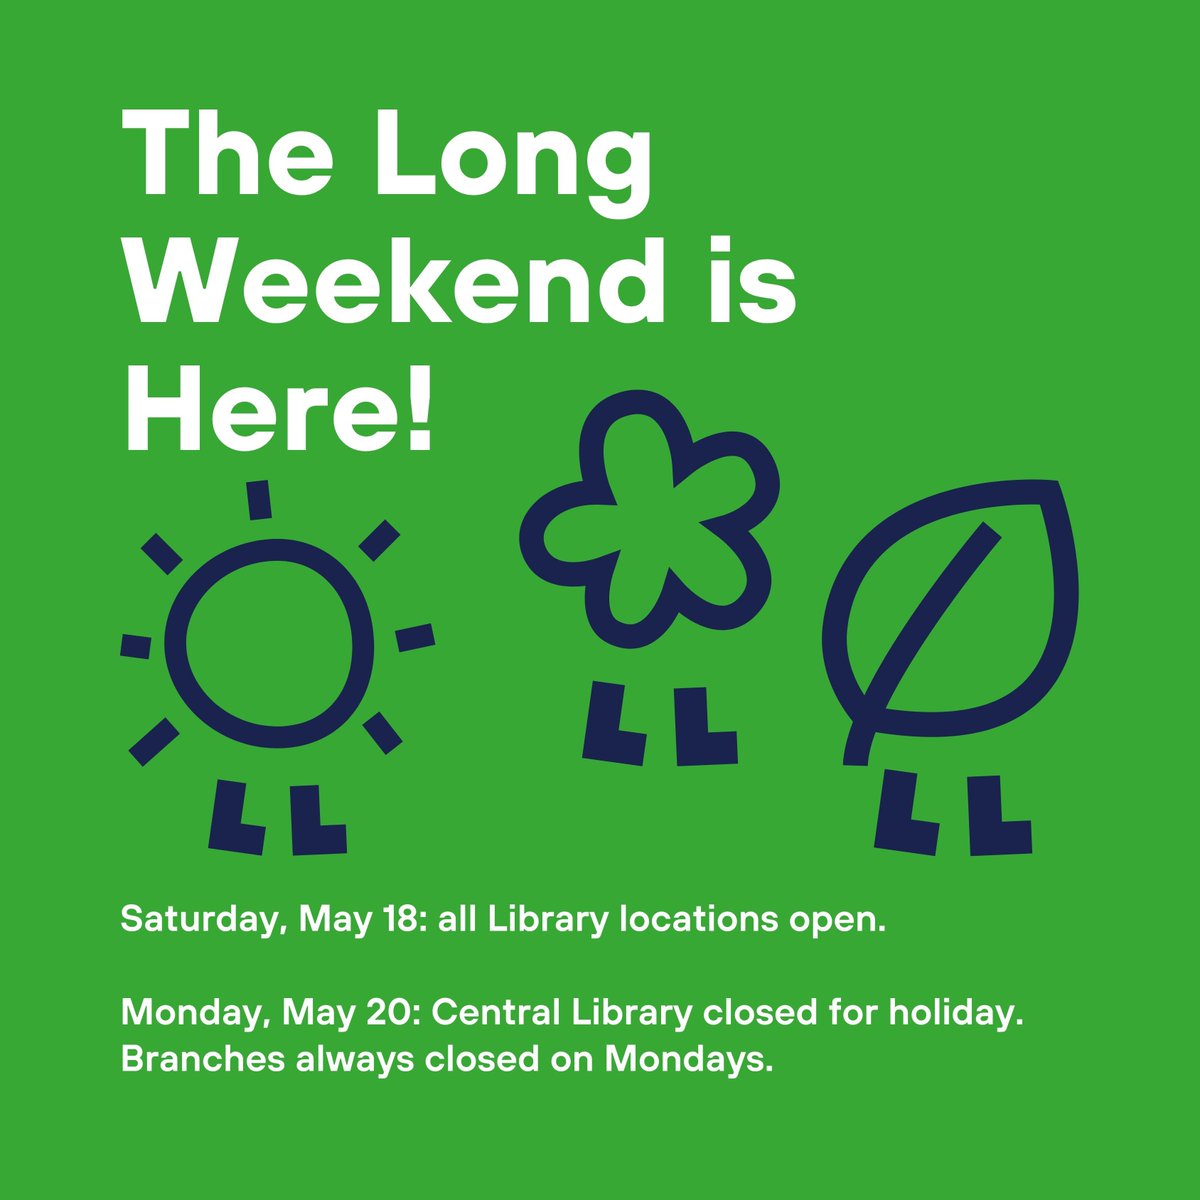 It's not too soon to stock up on your hot summer reads! 😎 📚📚📚 All Library locations are open regular hours this Saturday. 🌸 Central Library is closed on Monday (May 20) for the holiday. Branches are always closed on Mondays.